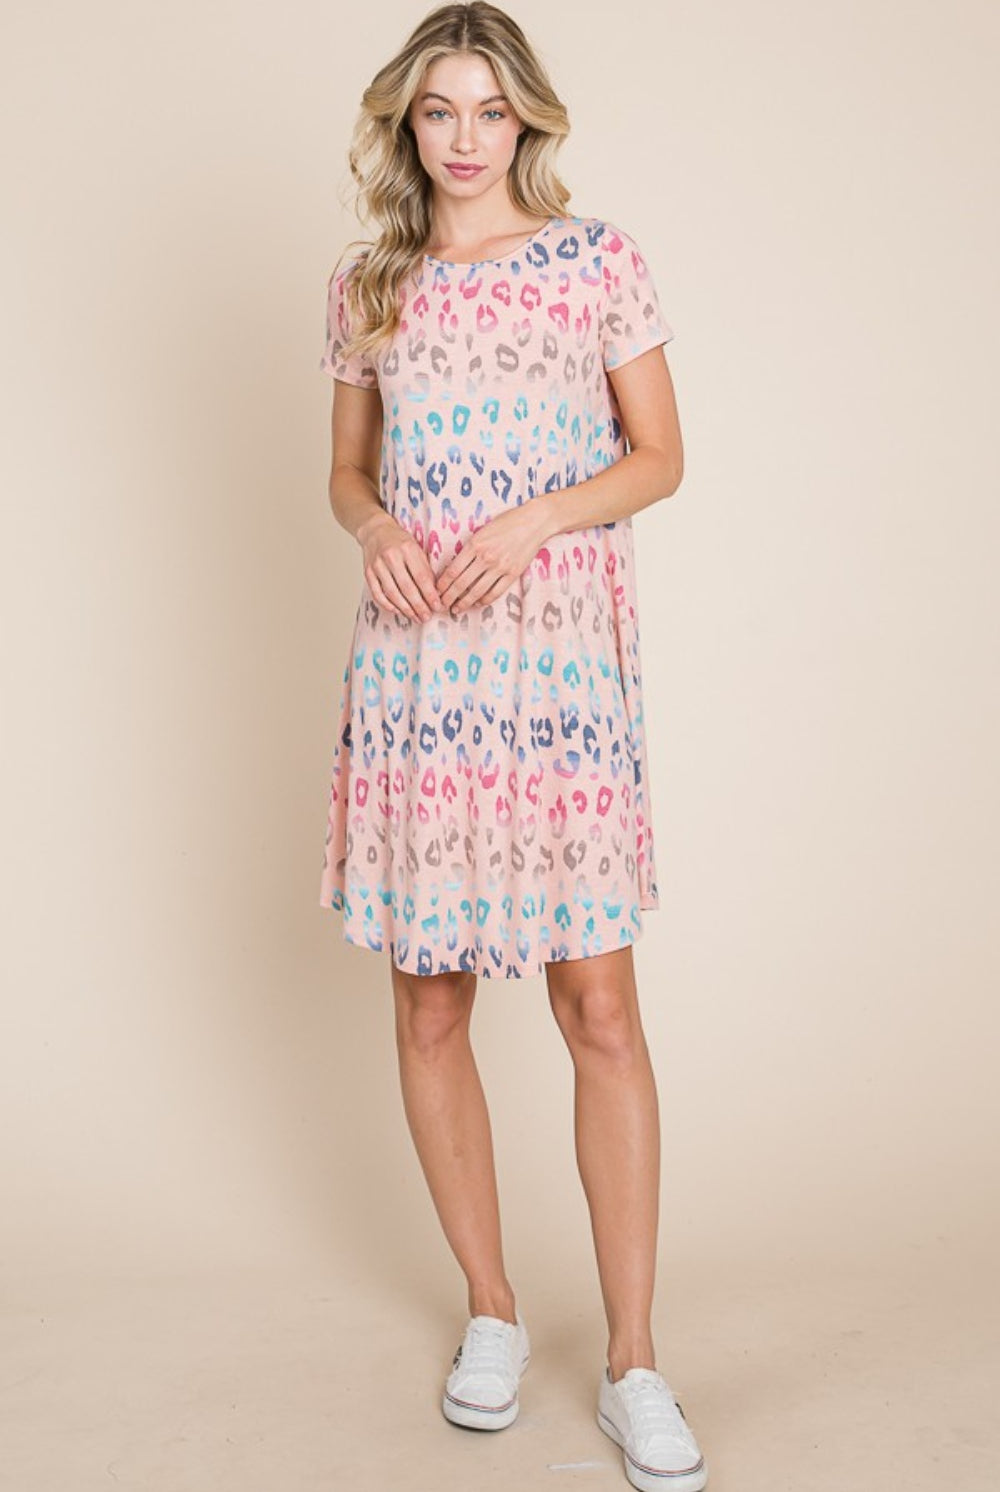 Happy woman wearing a Playful Pastel Leopard Print Short Sleeve Dress, embodying a cheerful and stylish vibe, perfect for spring and summer days.